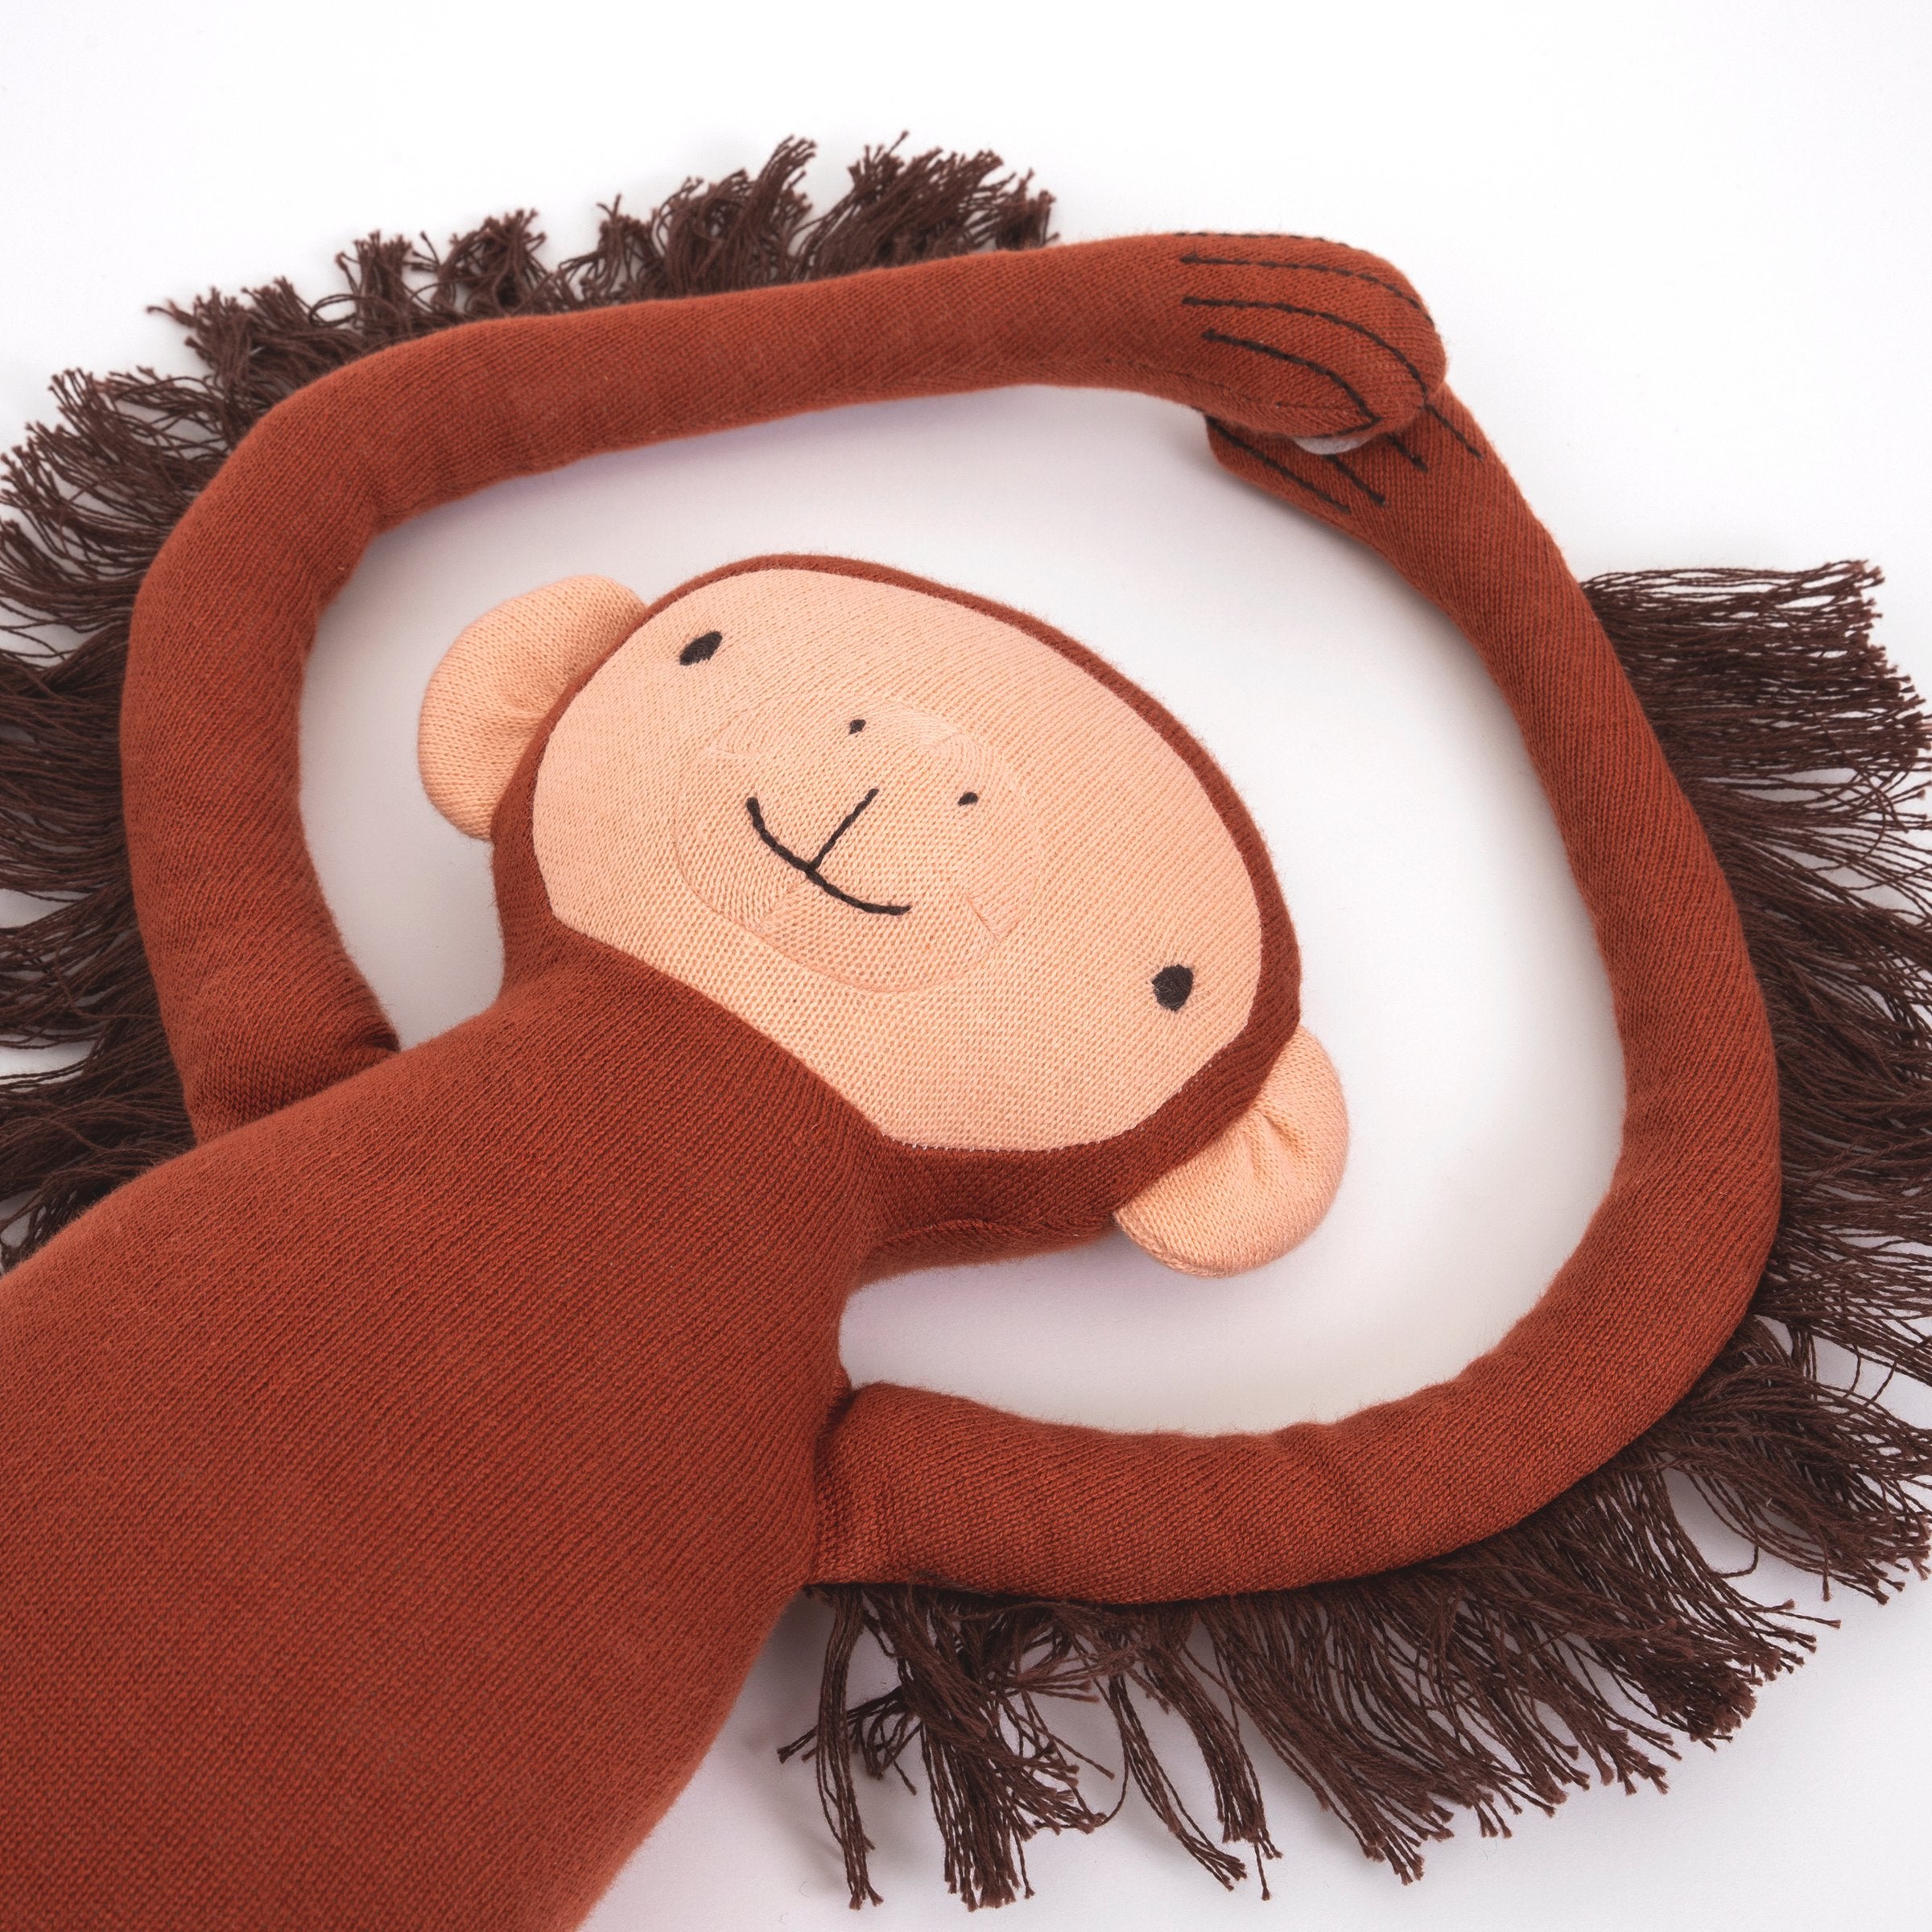 Our orgnaic cotton monkey soft toy is the perfect newborn baby gift.